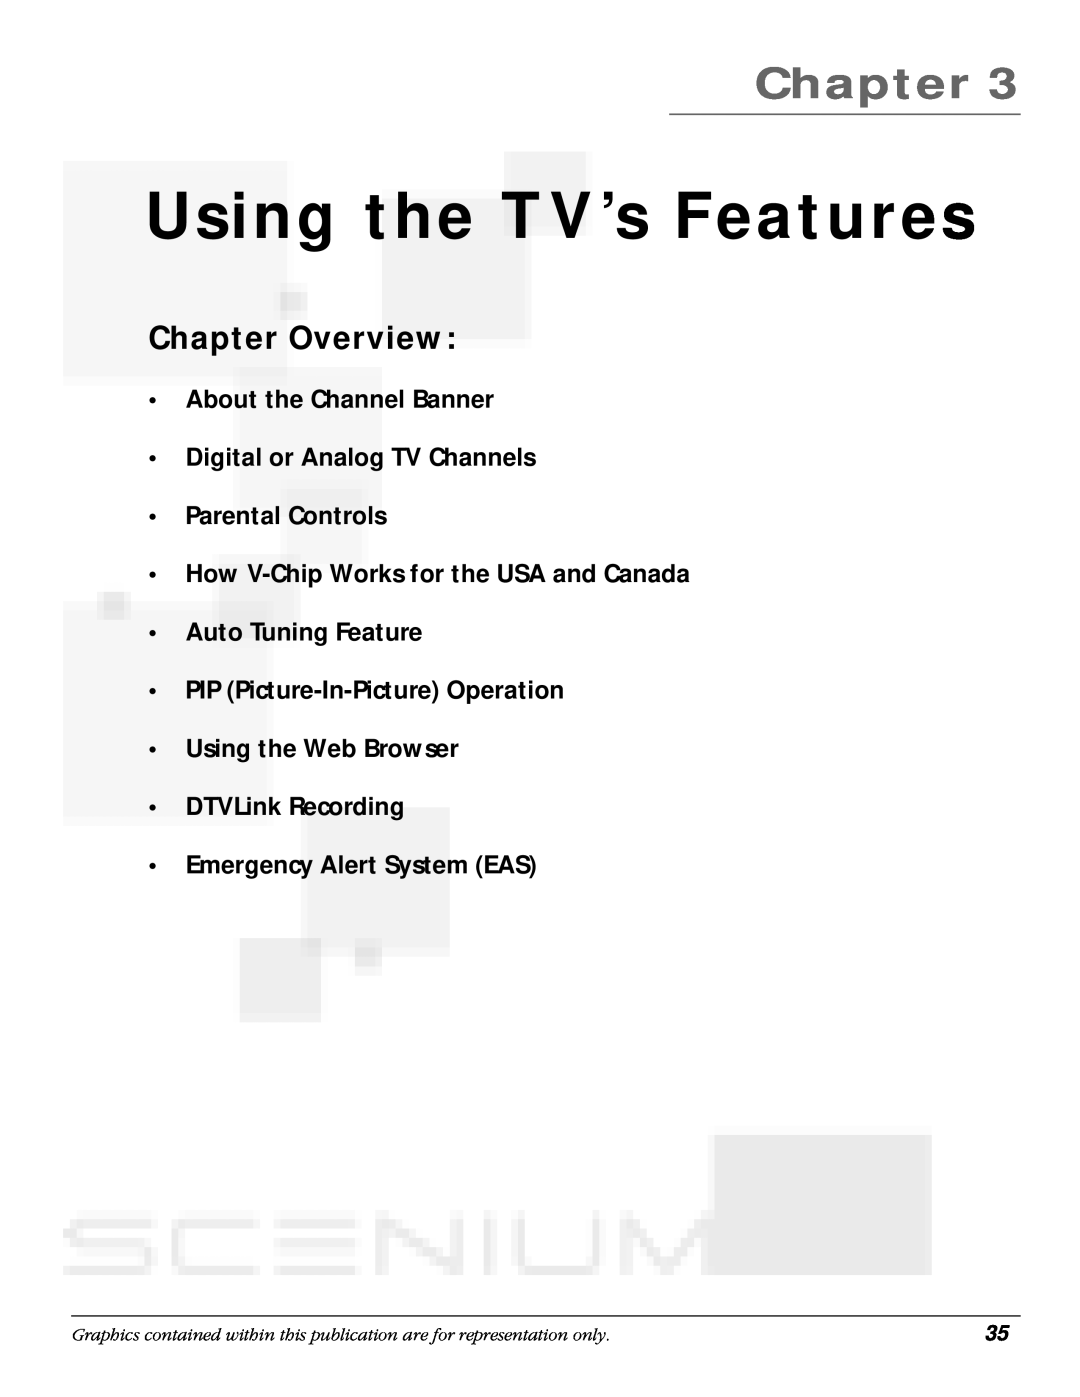 RCA scenium manual Using the TV’s Features, About the Channel Banner Digital or Analog TV Channels, Chapter Overview 